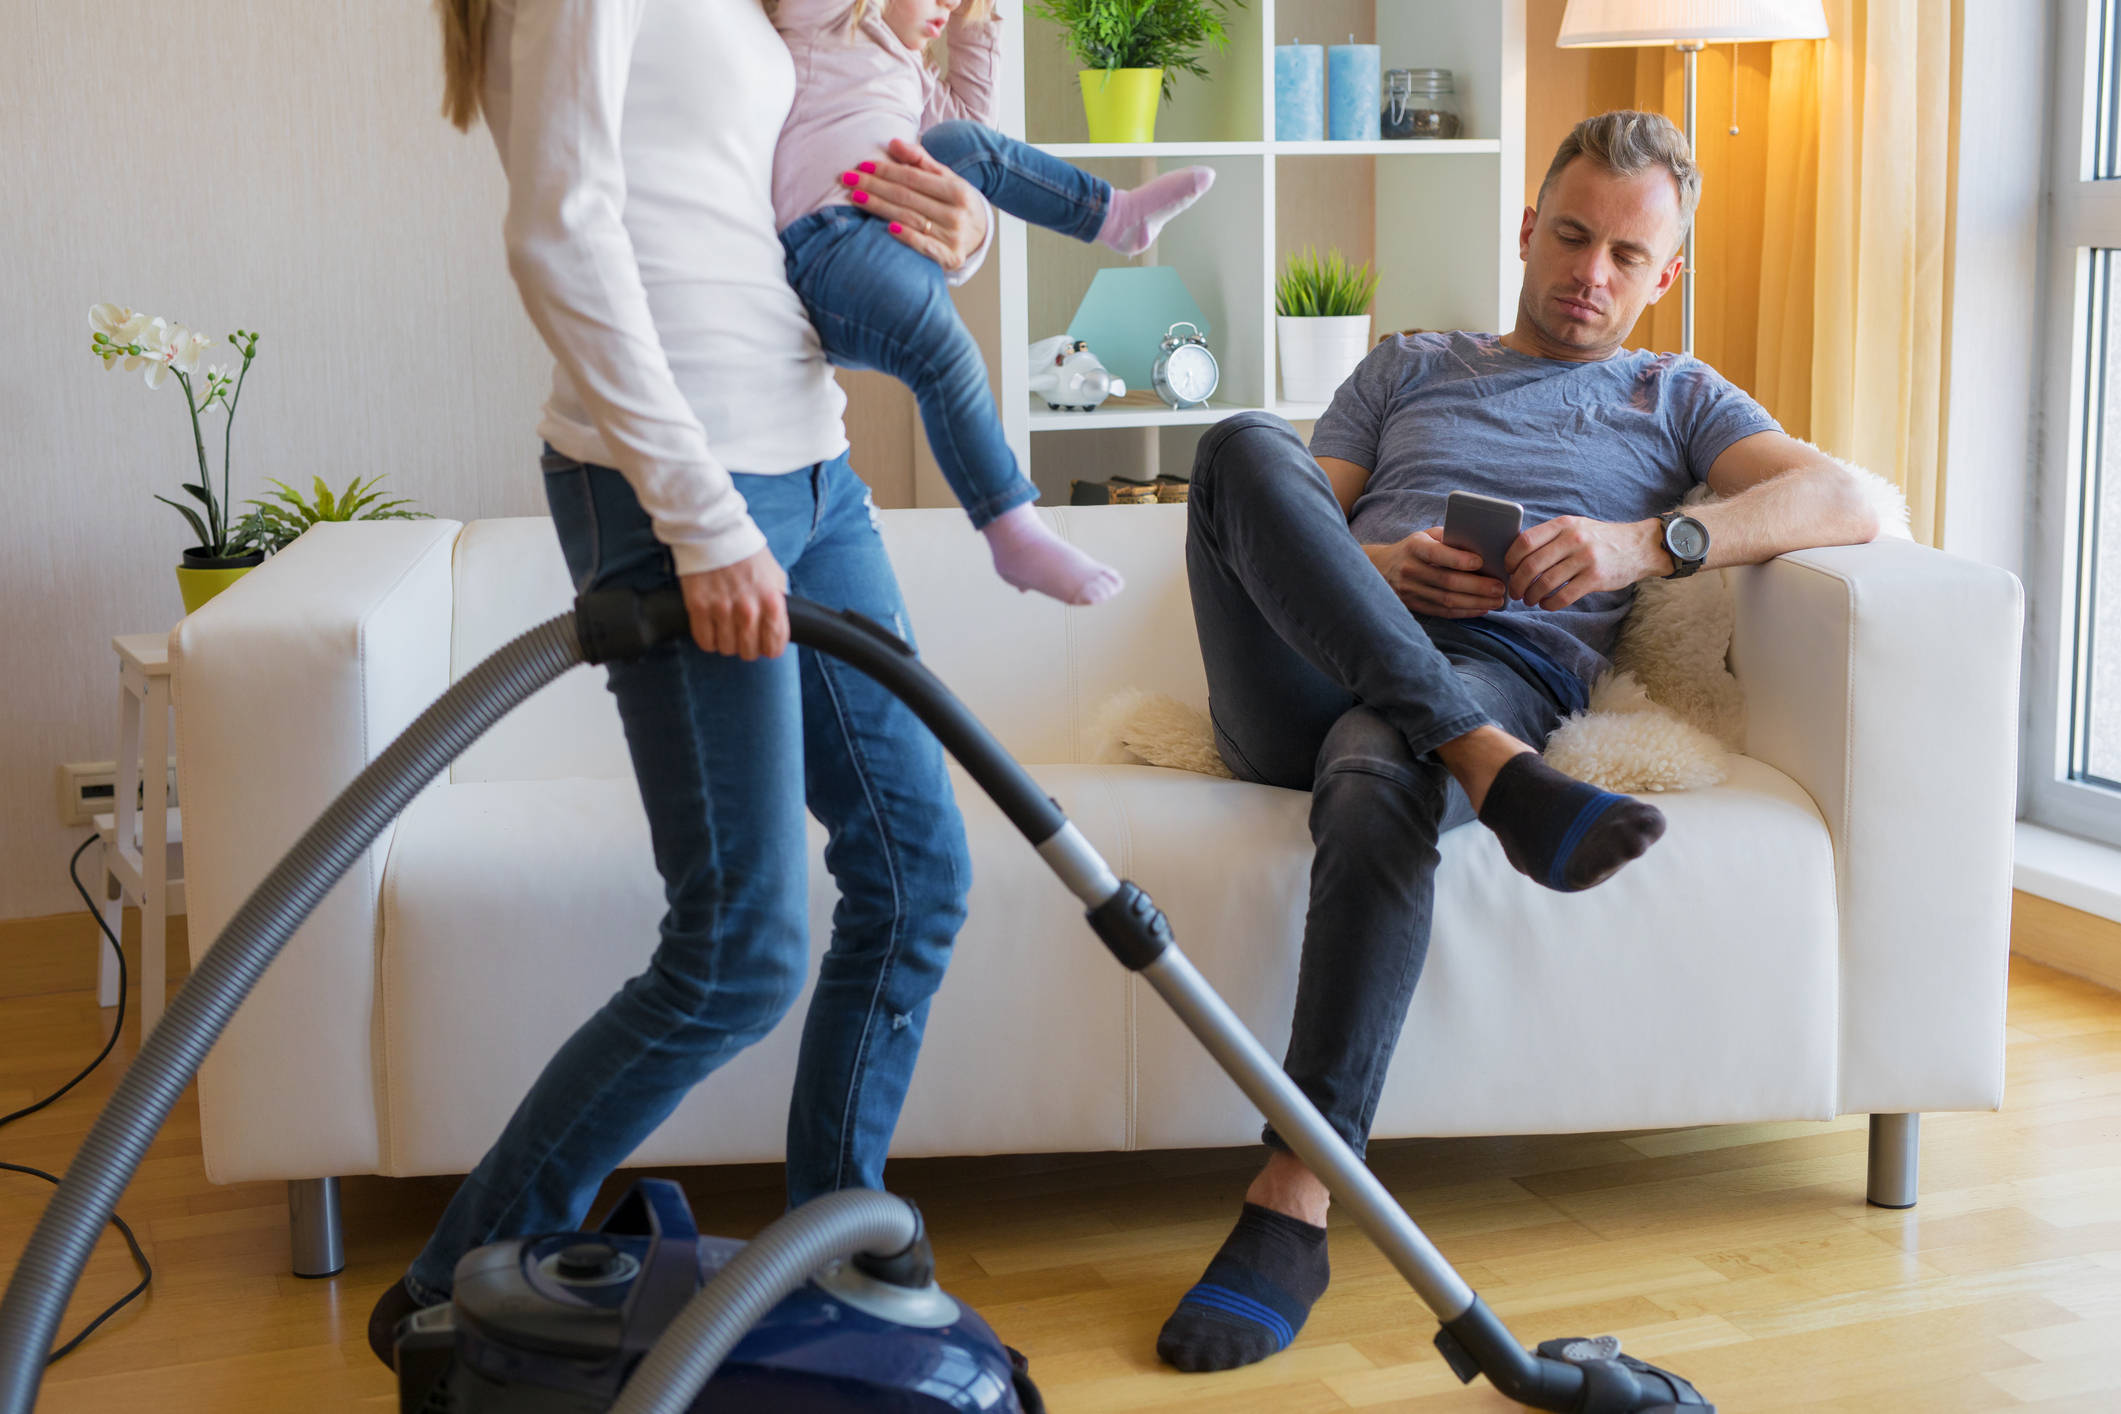 Person relaxing on sofa with device next to another holding child and vacuuming in a home setting